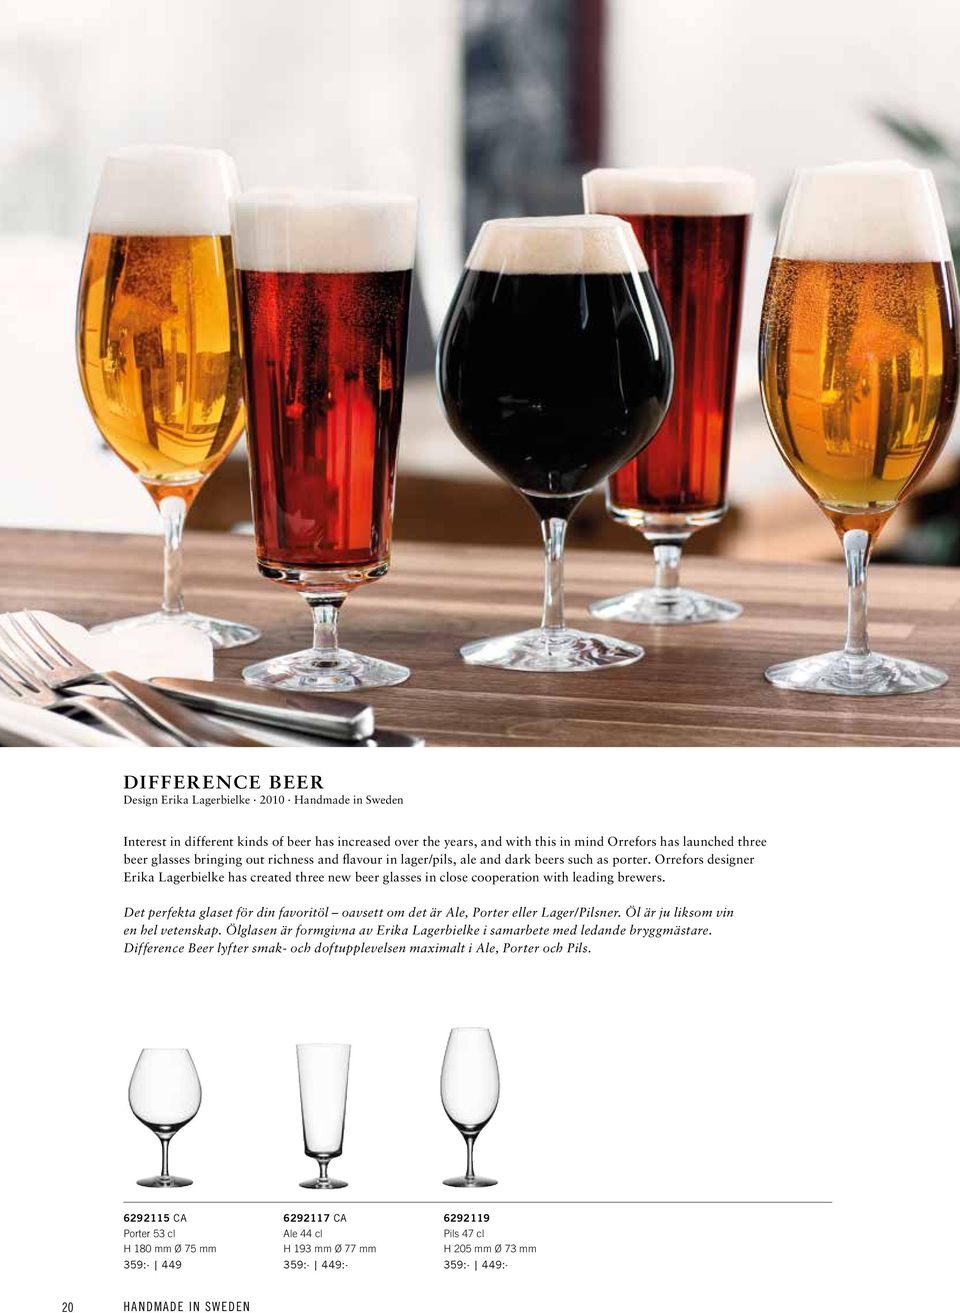 Orrefors designer Erika Lagerbielke has created three new beer glasses in close cooperation with leading brewers.